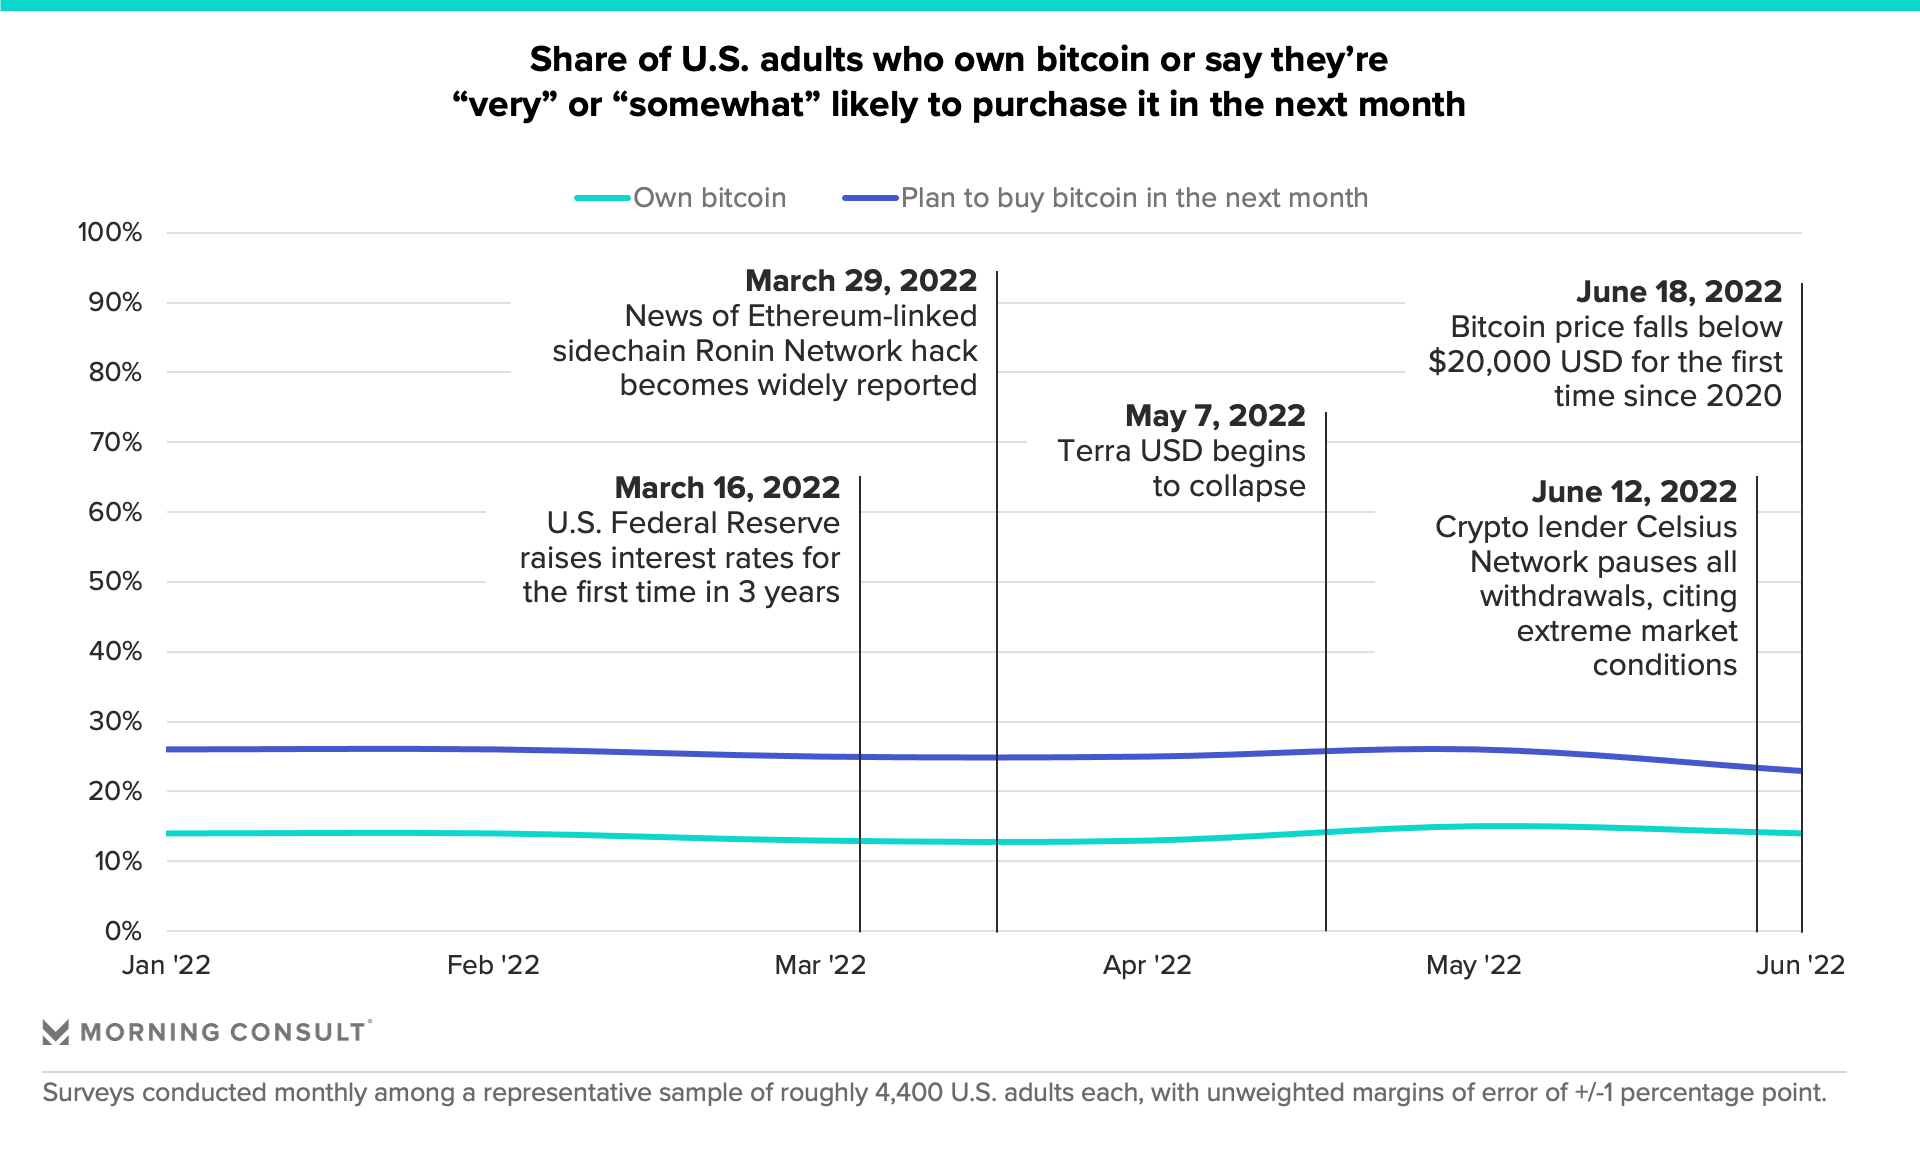 Trend charts showing share of U.S. adults who own bitcoin and plan to purchase it in the next month